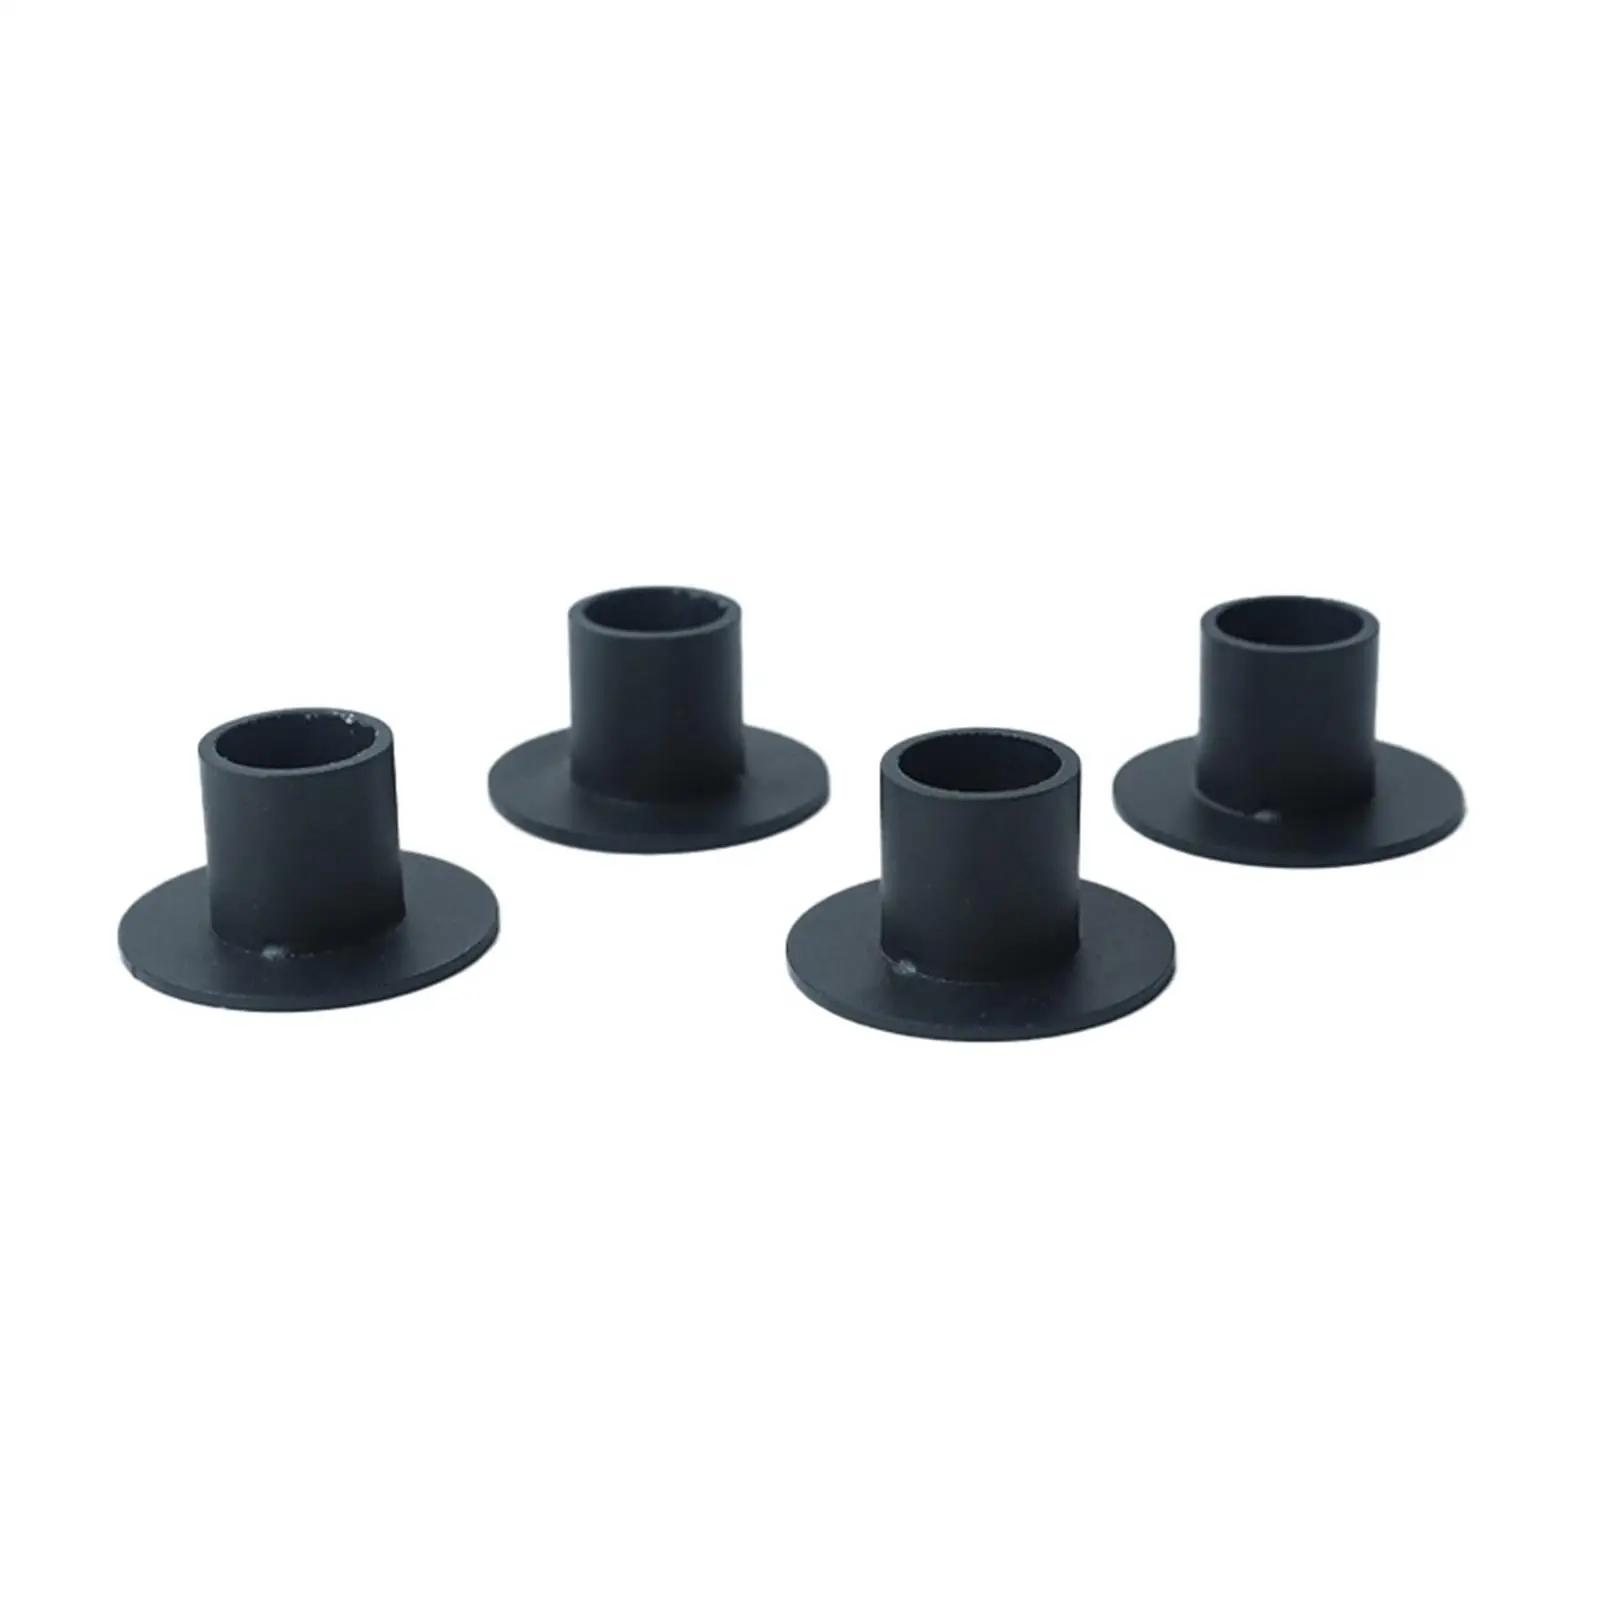 4Pcs Candlestick Holders Stand for Pillar Candles Candleholder Candle Holder